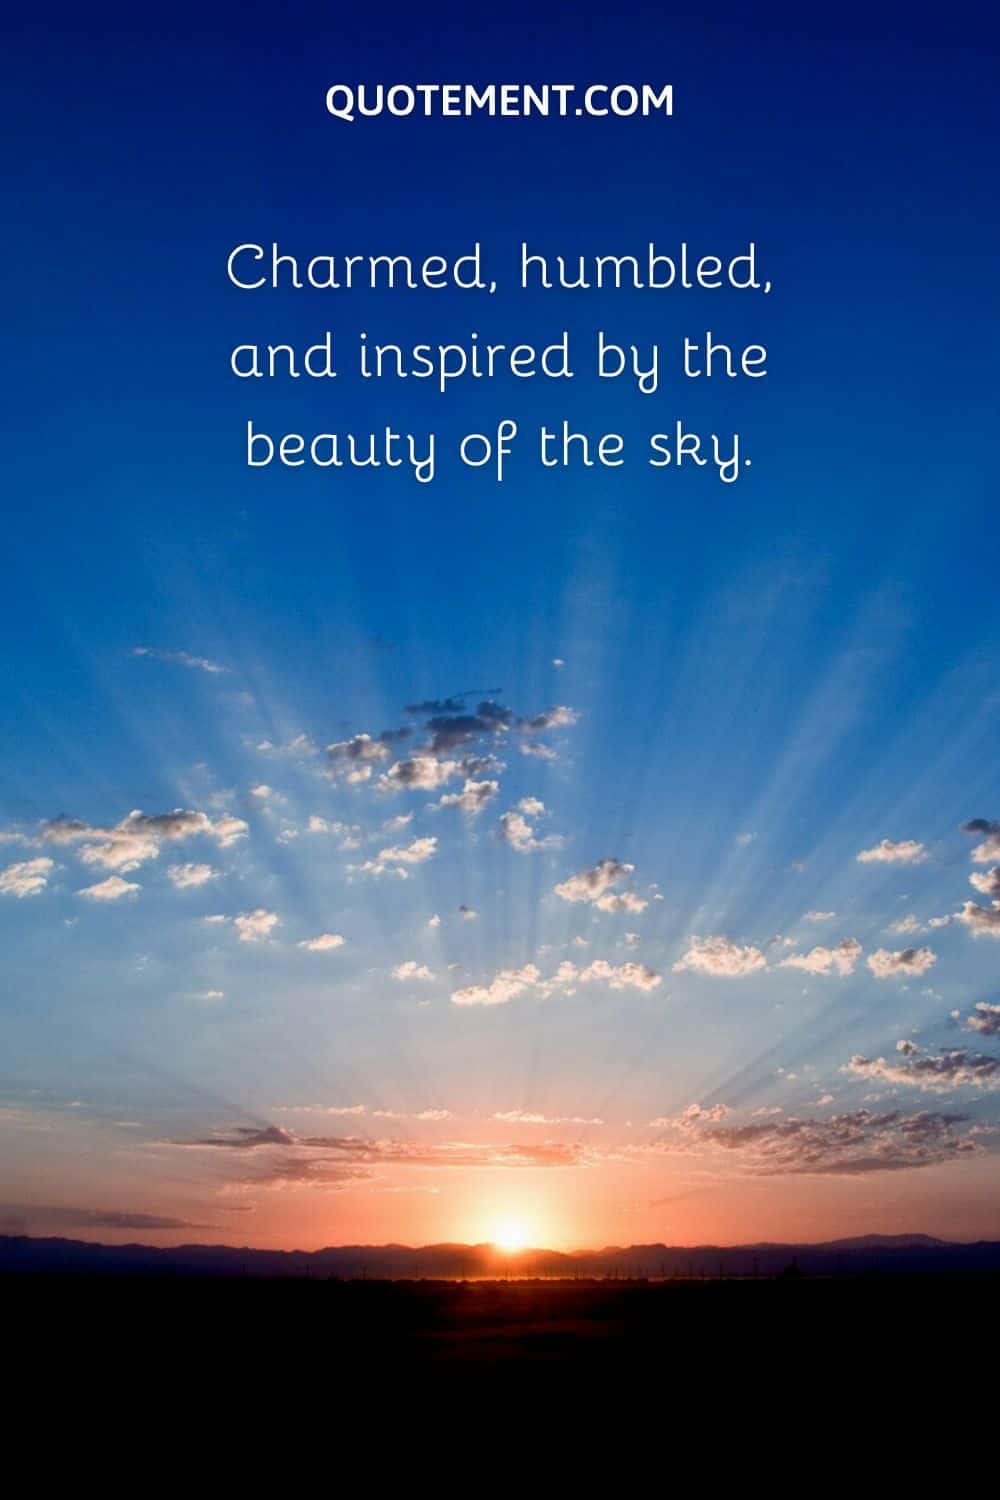 Charmed, humbled, and inspired by the beauty of the sky.